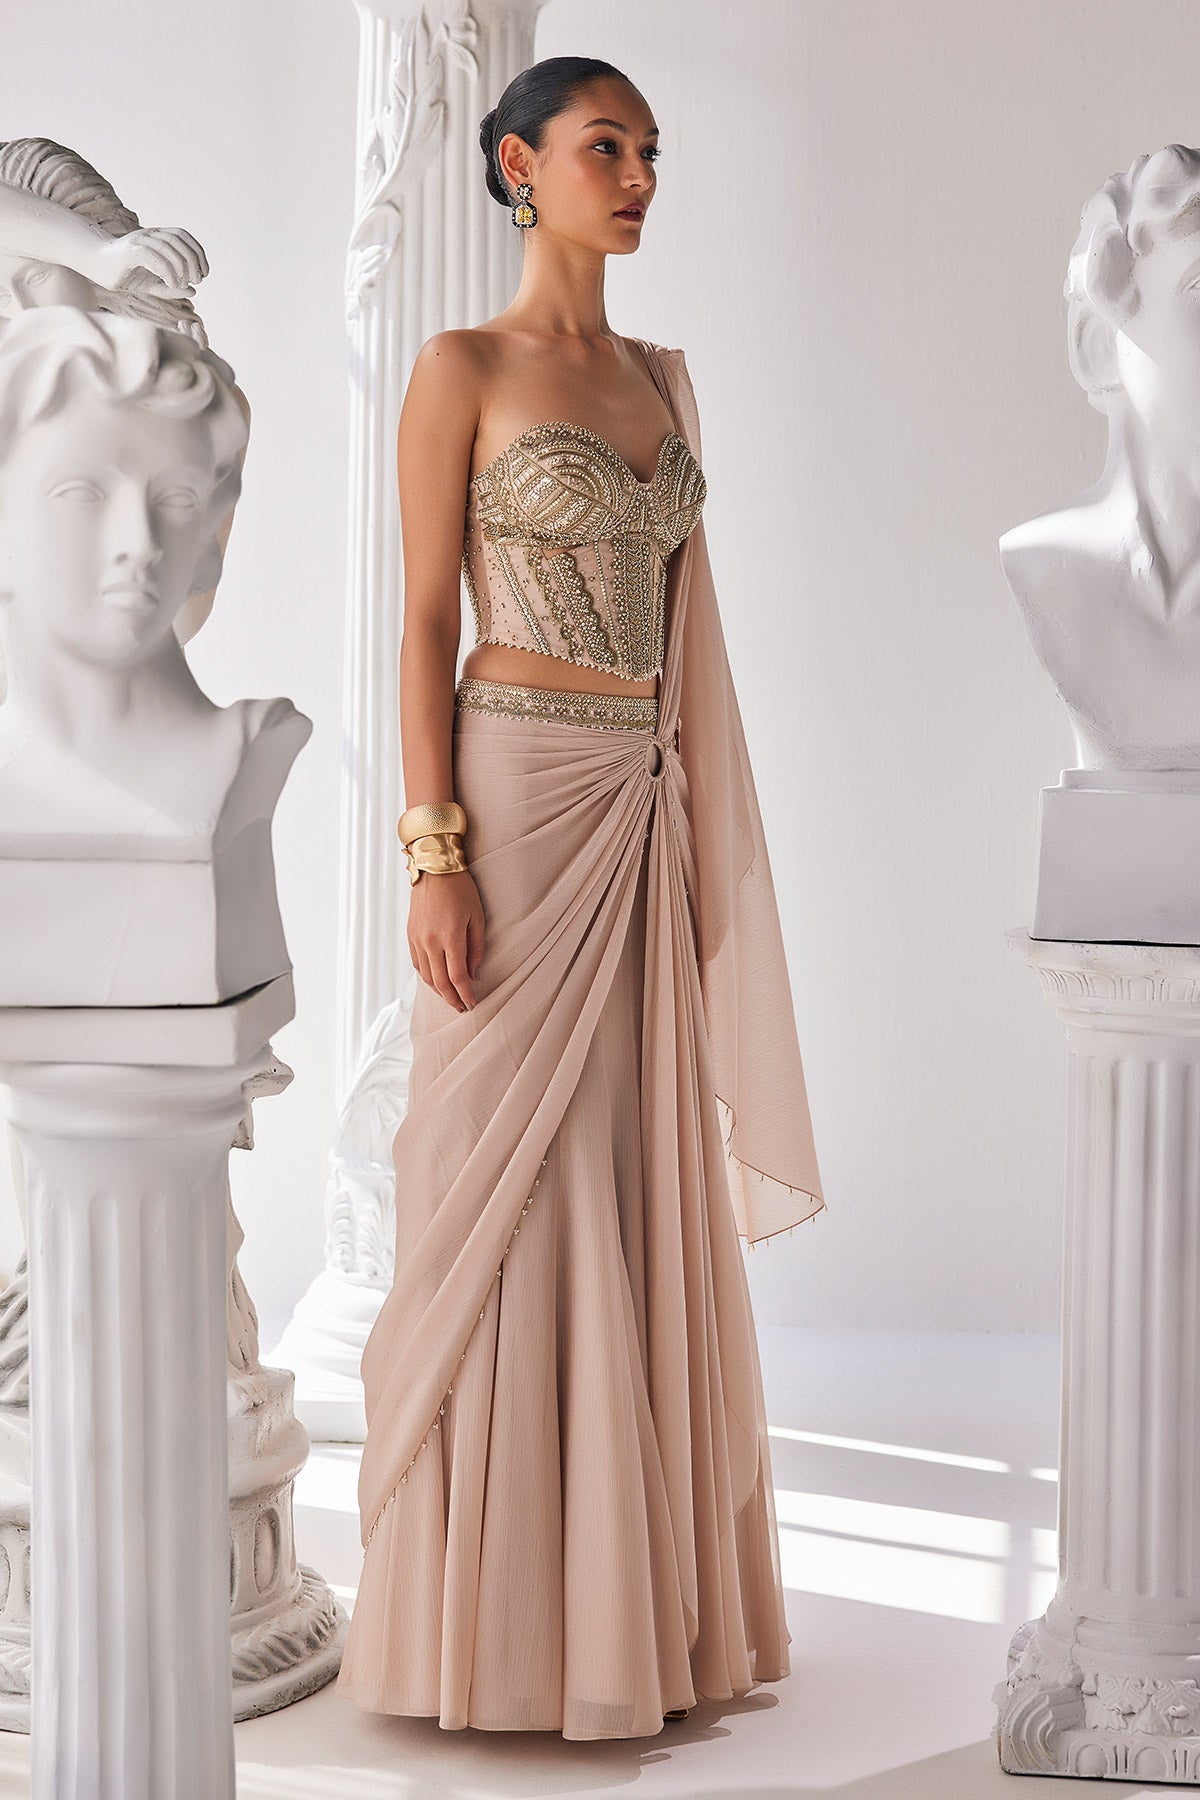 Draped Saree In Metallic Shimmer Chiffon Fabric With Intricate Embroidery Detail In The Corset Along With An Embroiderd Belt.